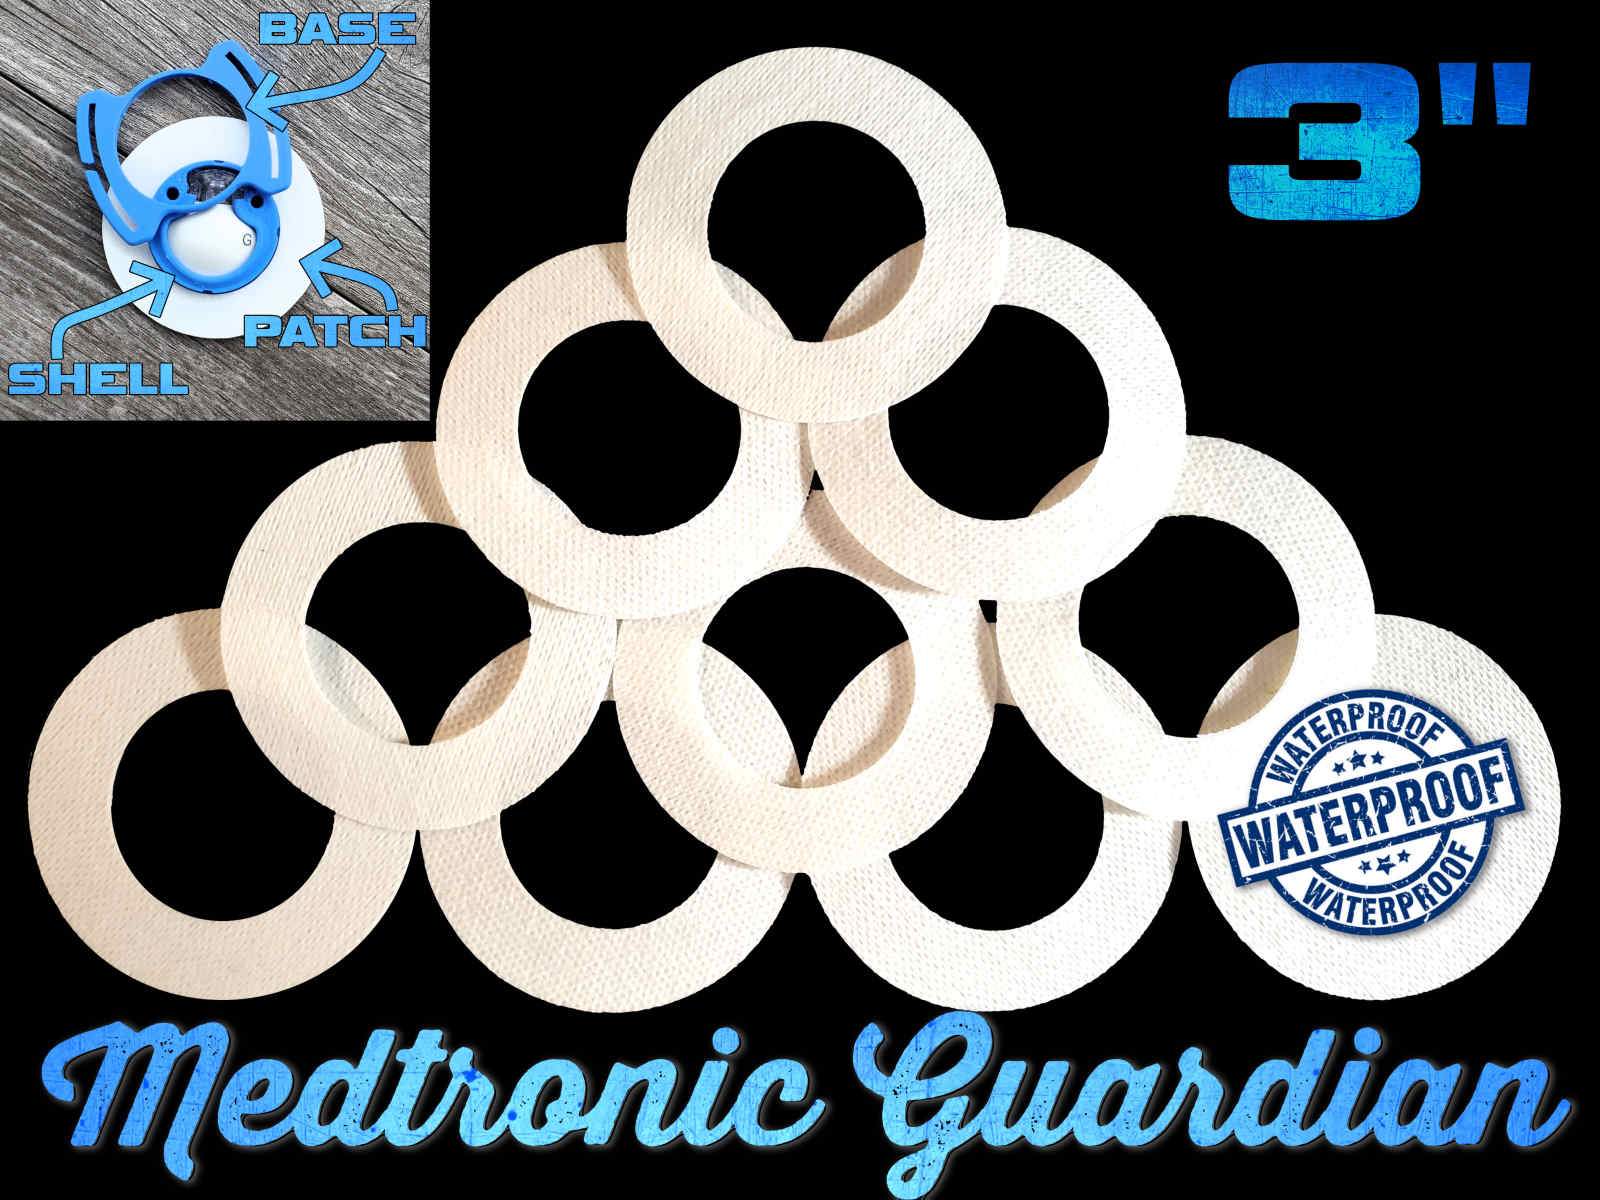 Medtronic Guardian 3" Inch Overlay Adhesive Patch : 360 Shell Back Series: White Poly woven Waterproof